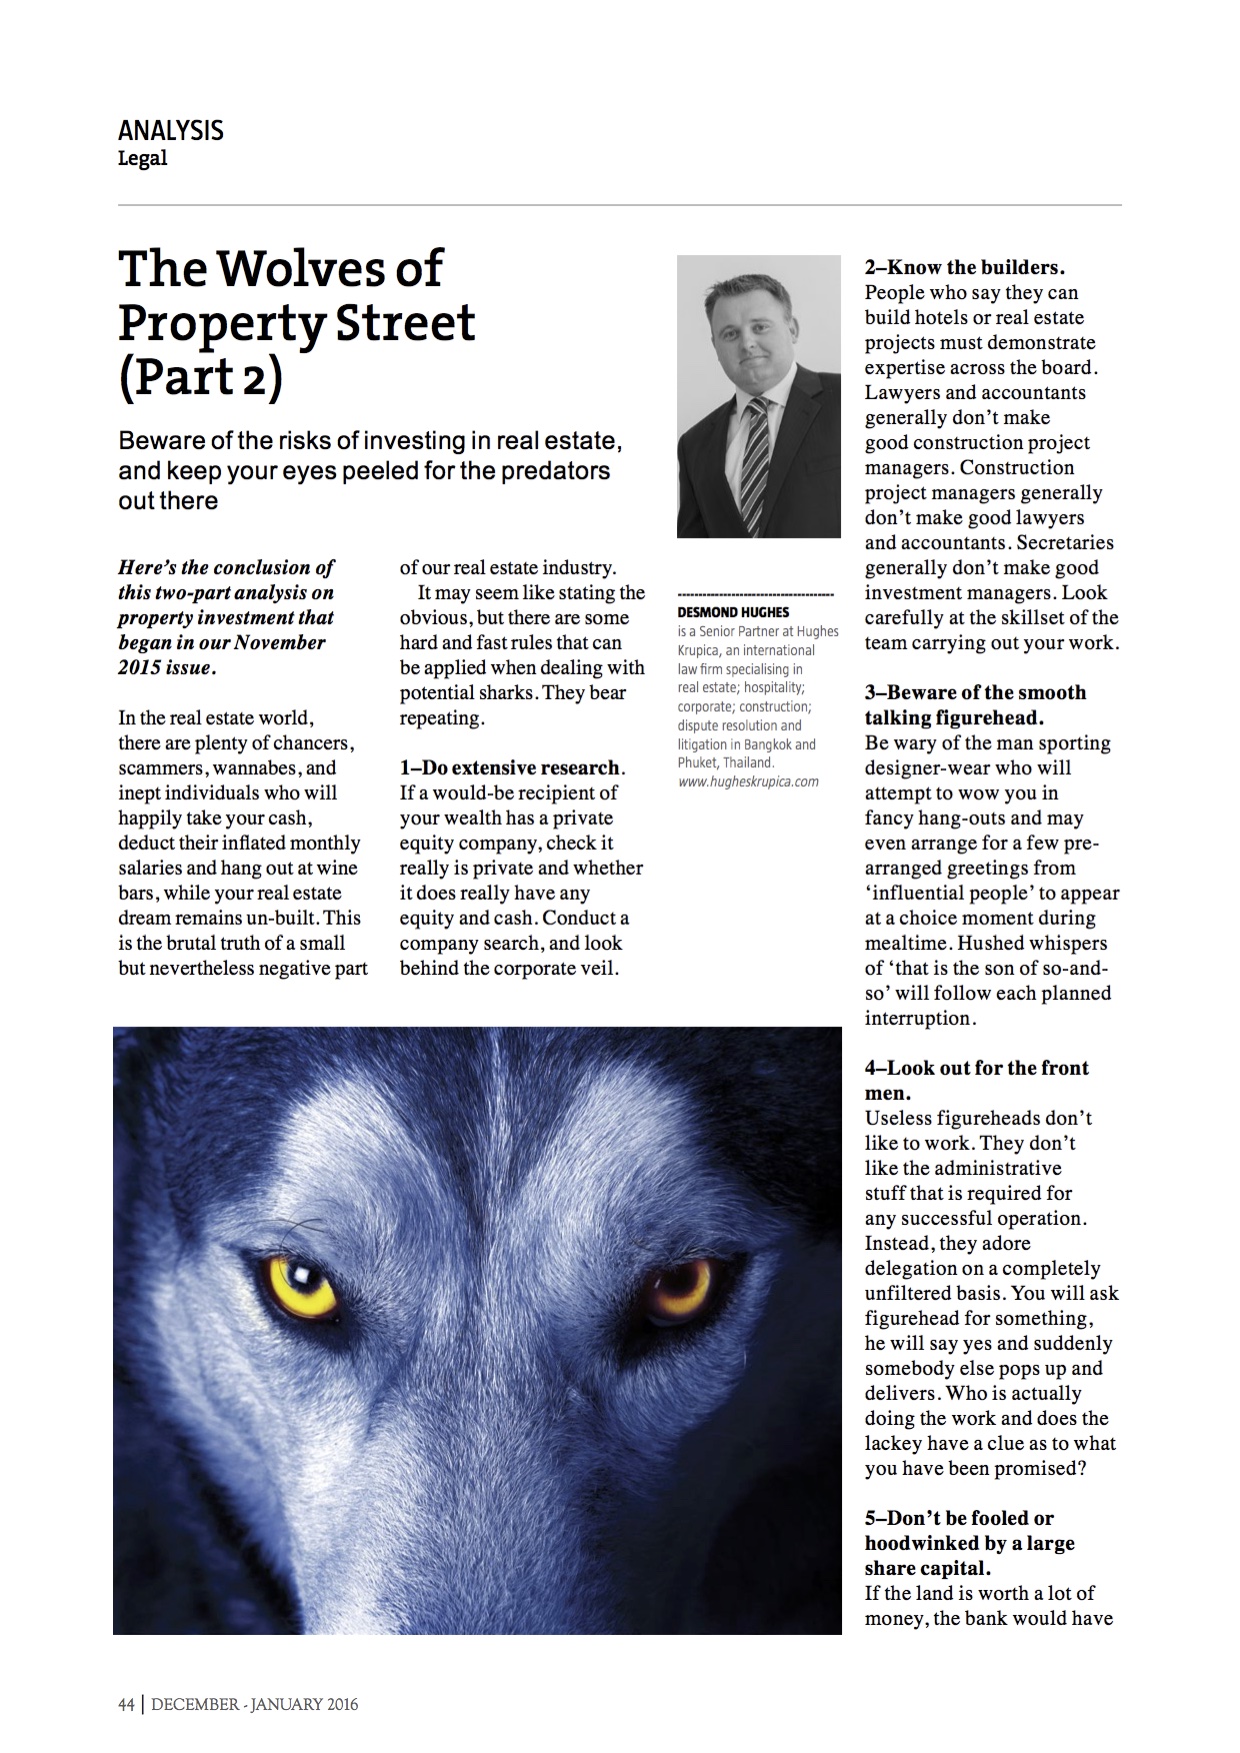 Wolves of Property Street Part 2 of 2